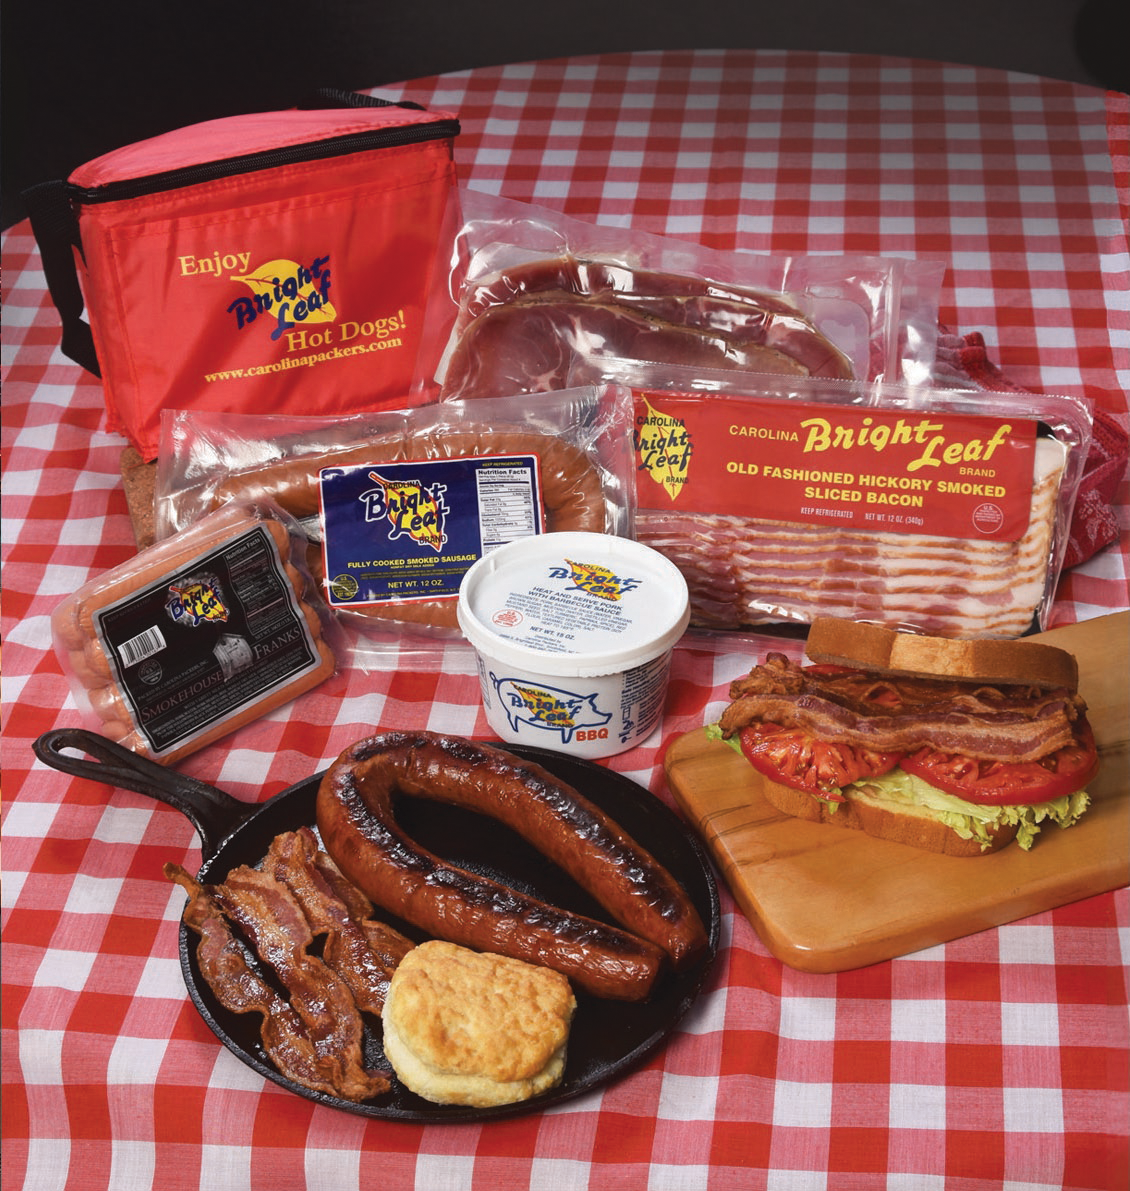 The Bright Leaf Holiday Smokehouse Sampler (1-Smokehouse Franks, 1-Loop Smoked Sausage, 1-Bacon, 1-BBQ, 1-Center Cut Ham Slices